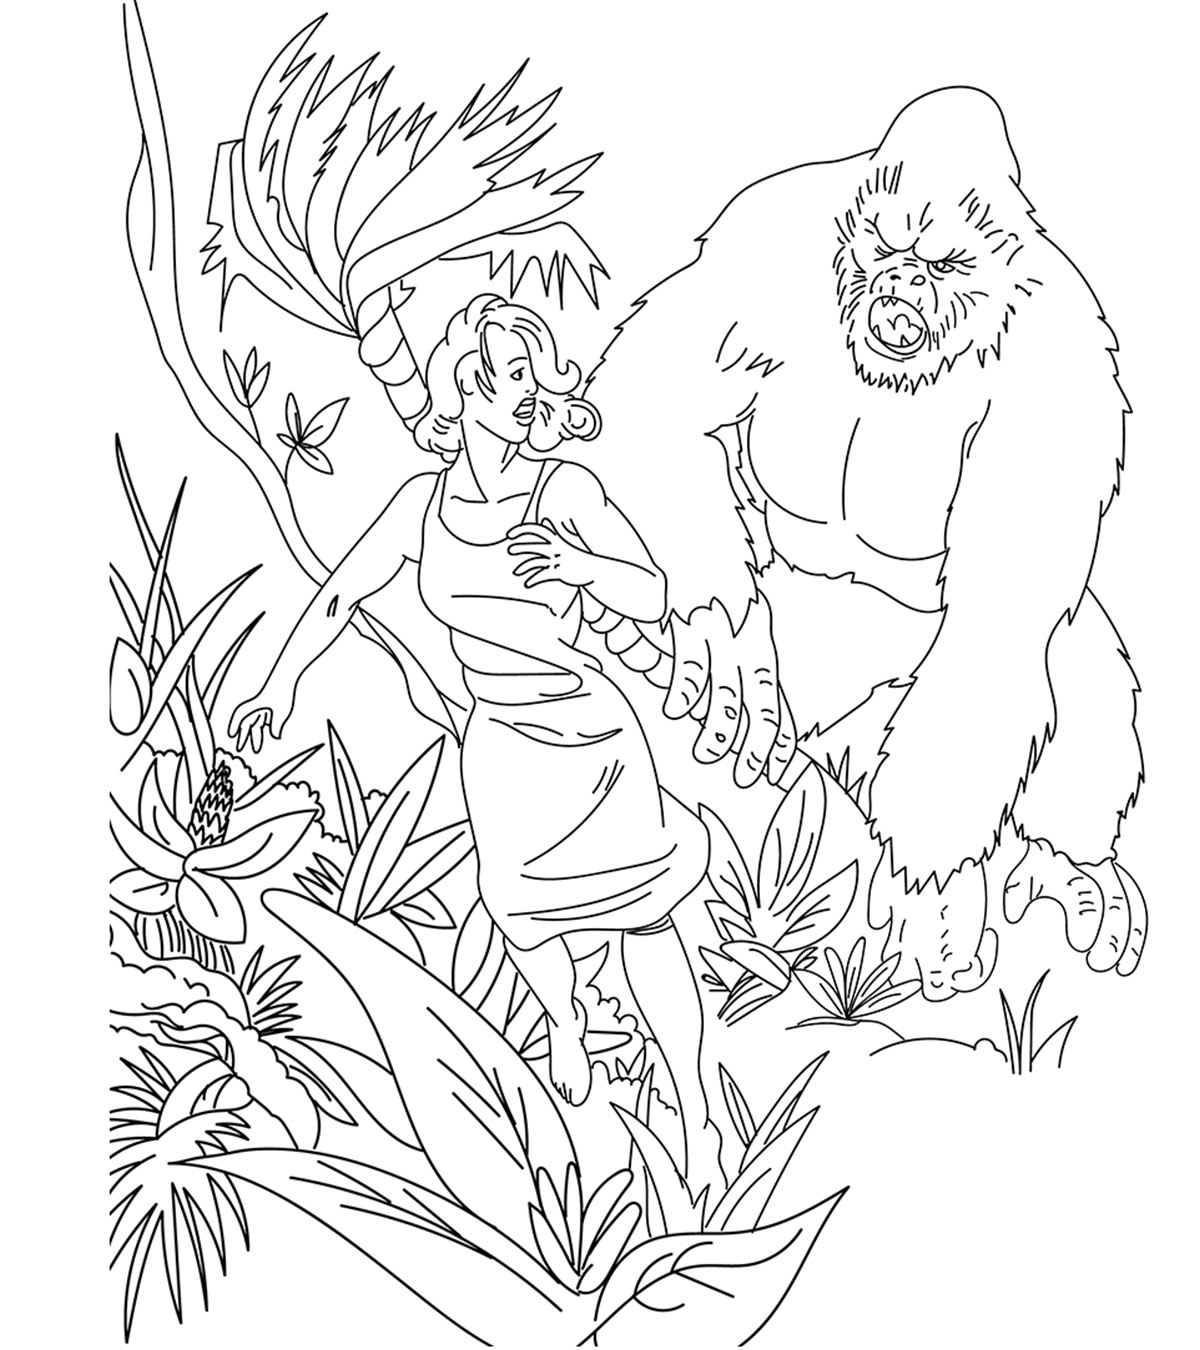 King Kong Coloring Pages - Best Coloring Pages For Kids